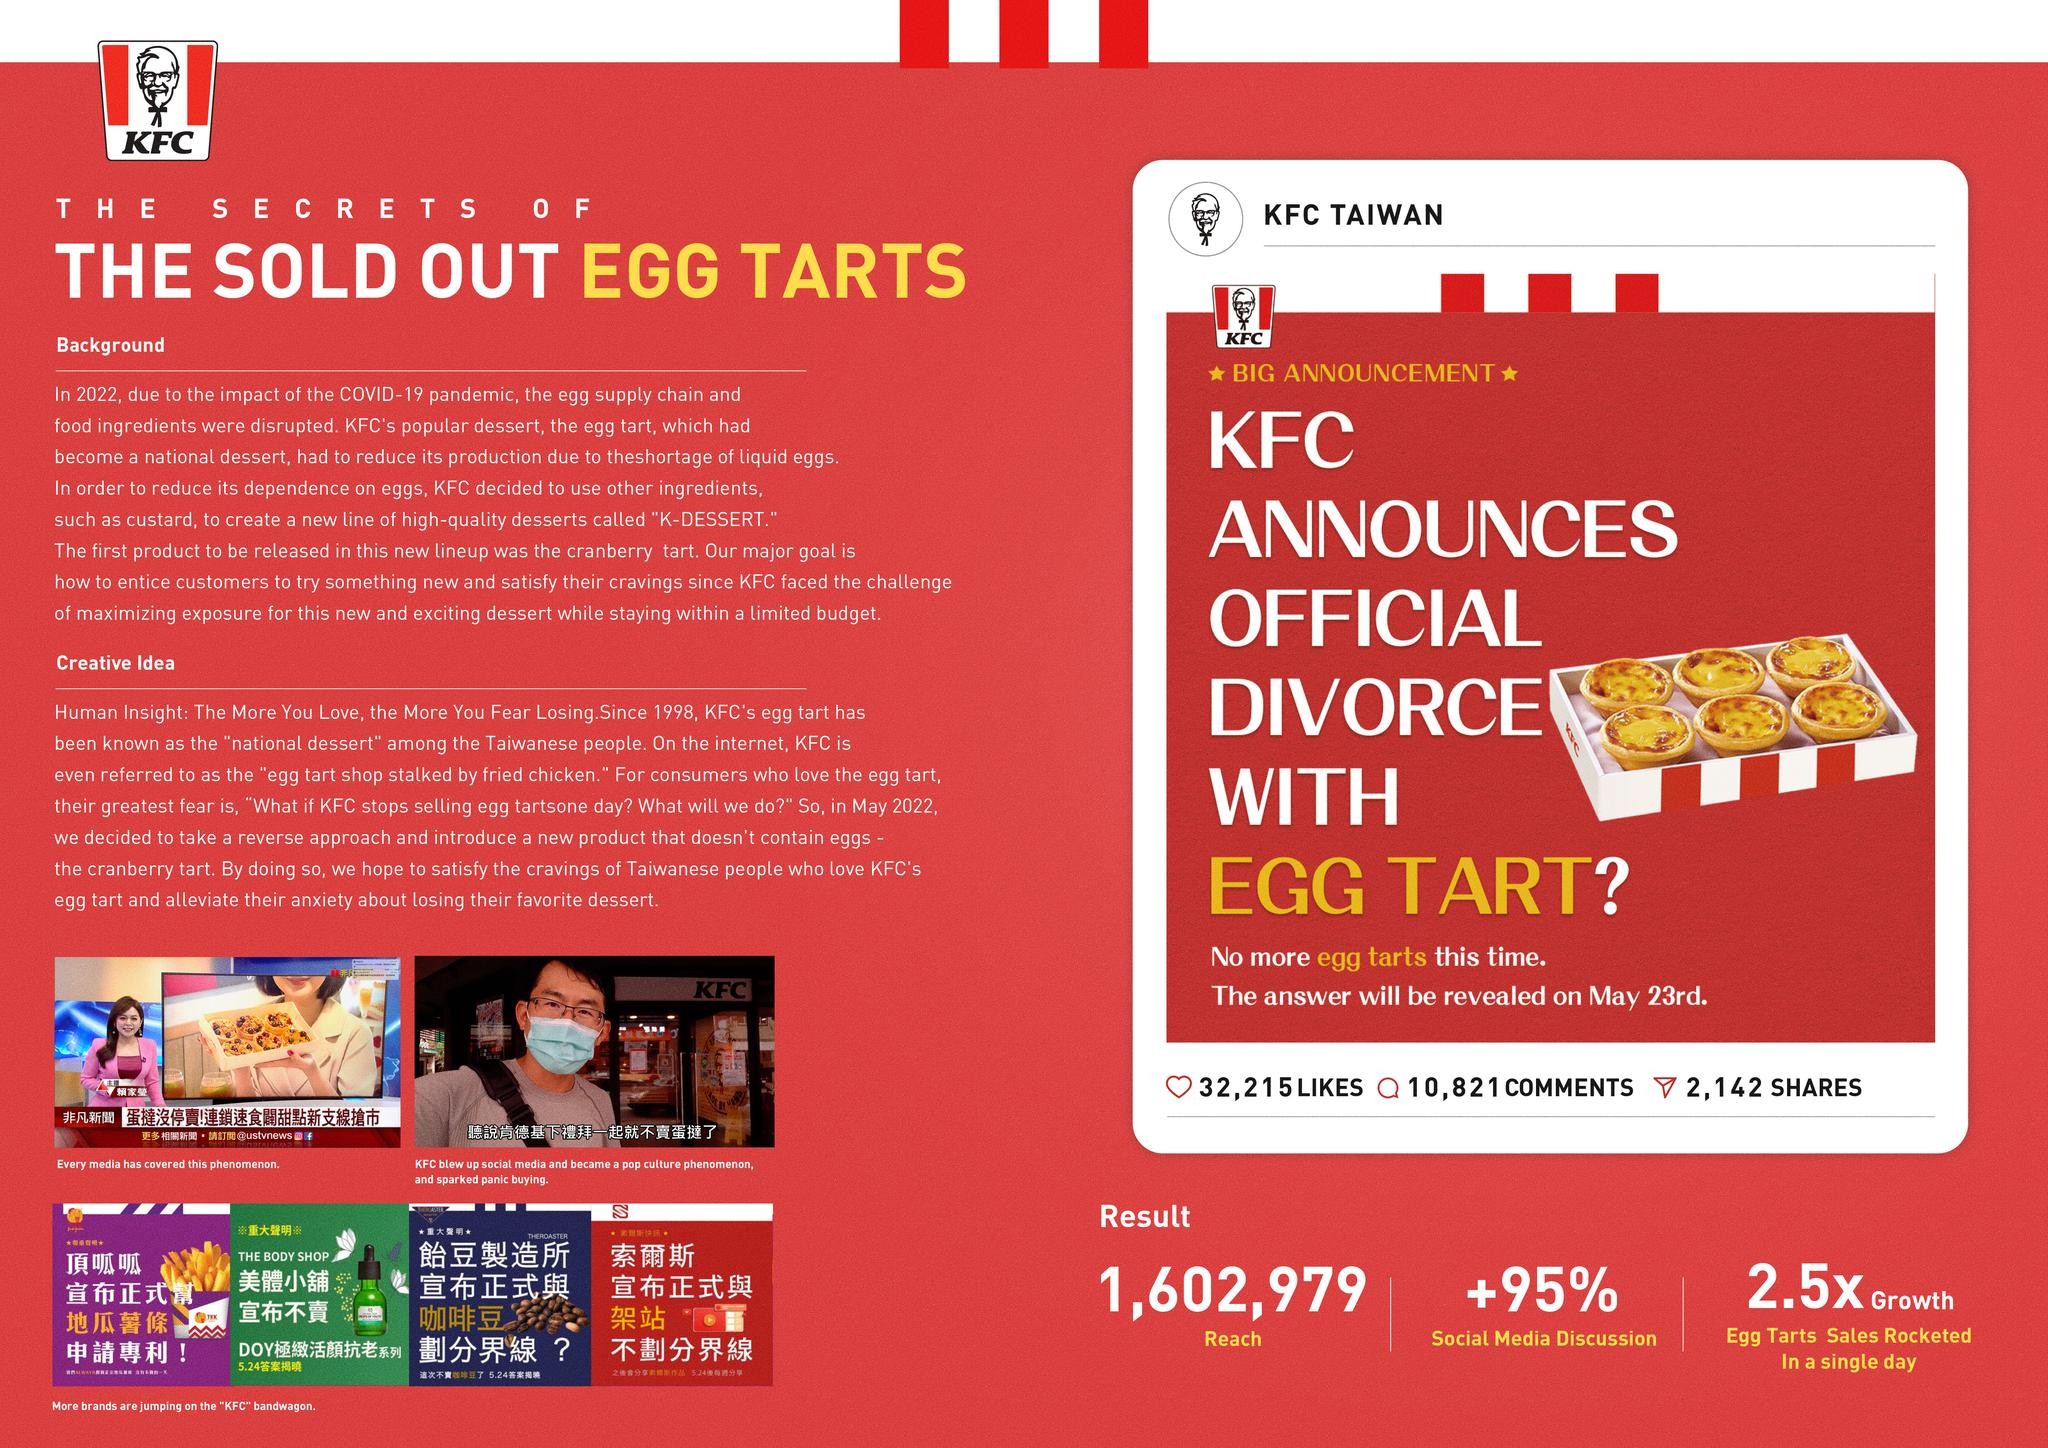 THE SECRETS OF THE SOLD OUT EGG TARTS